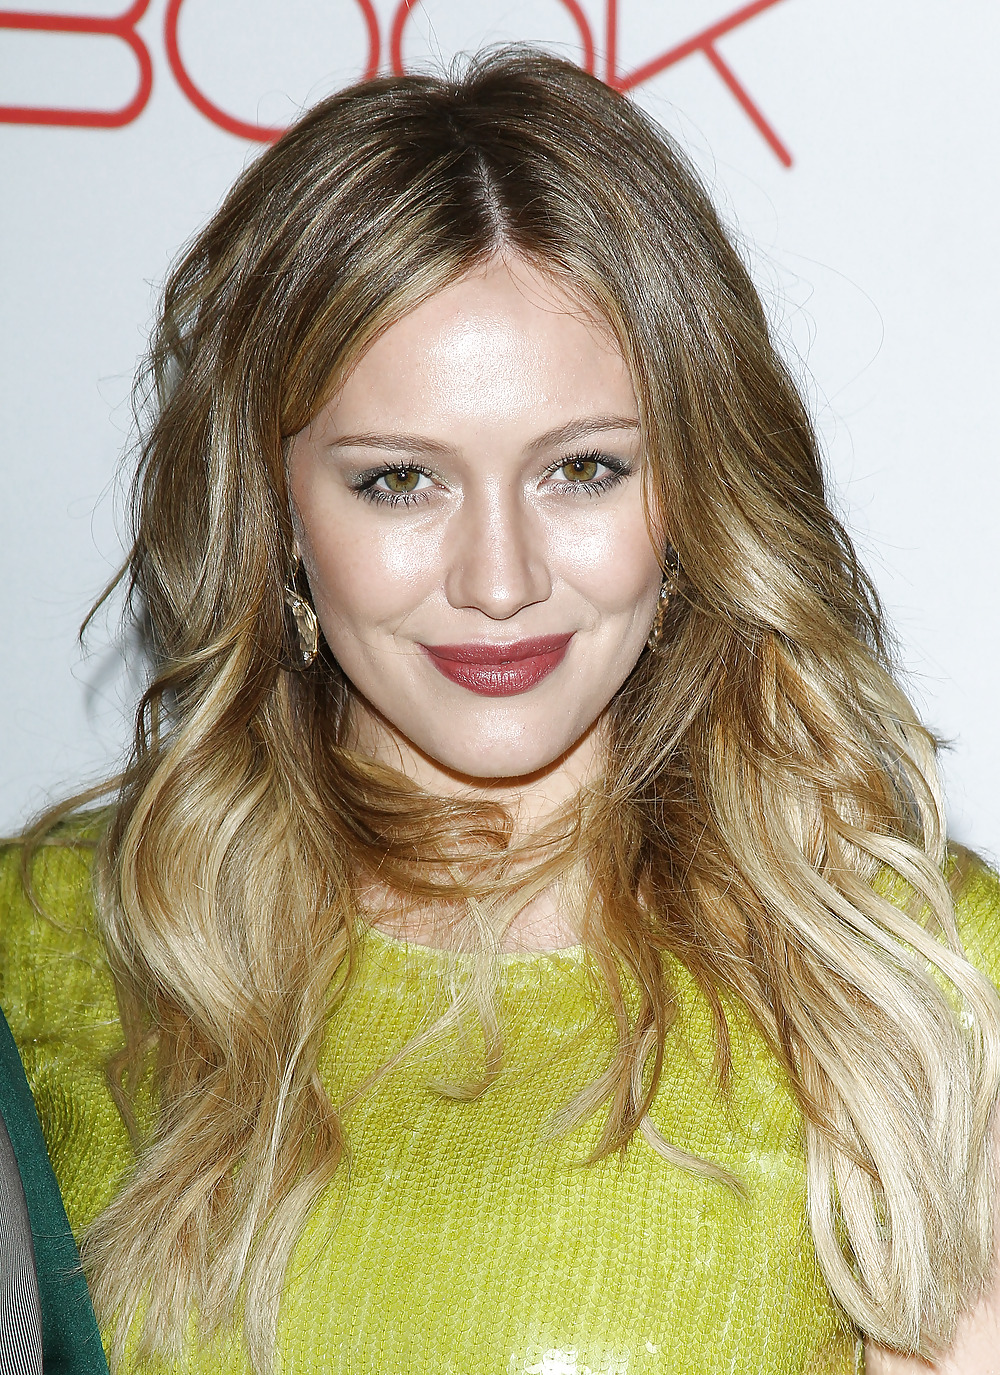 Hilary Duff Beauty Book For Brain Cancer launch #6234490